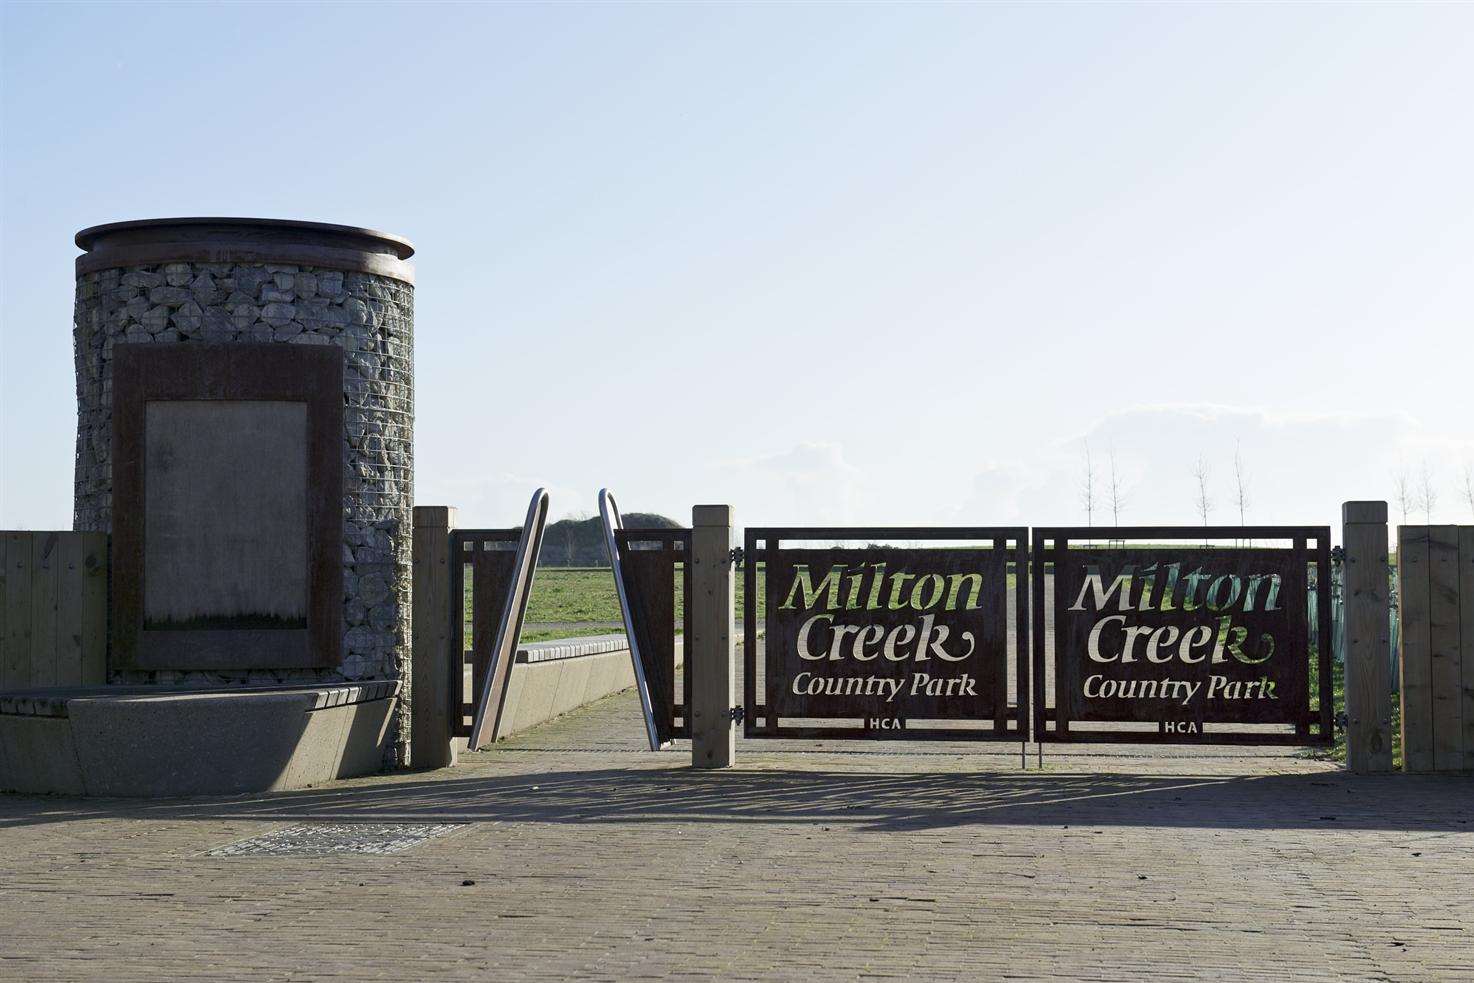 The alleged attack was at Milton Creek Country Park